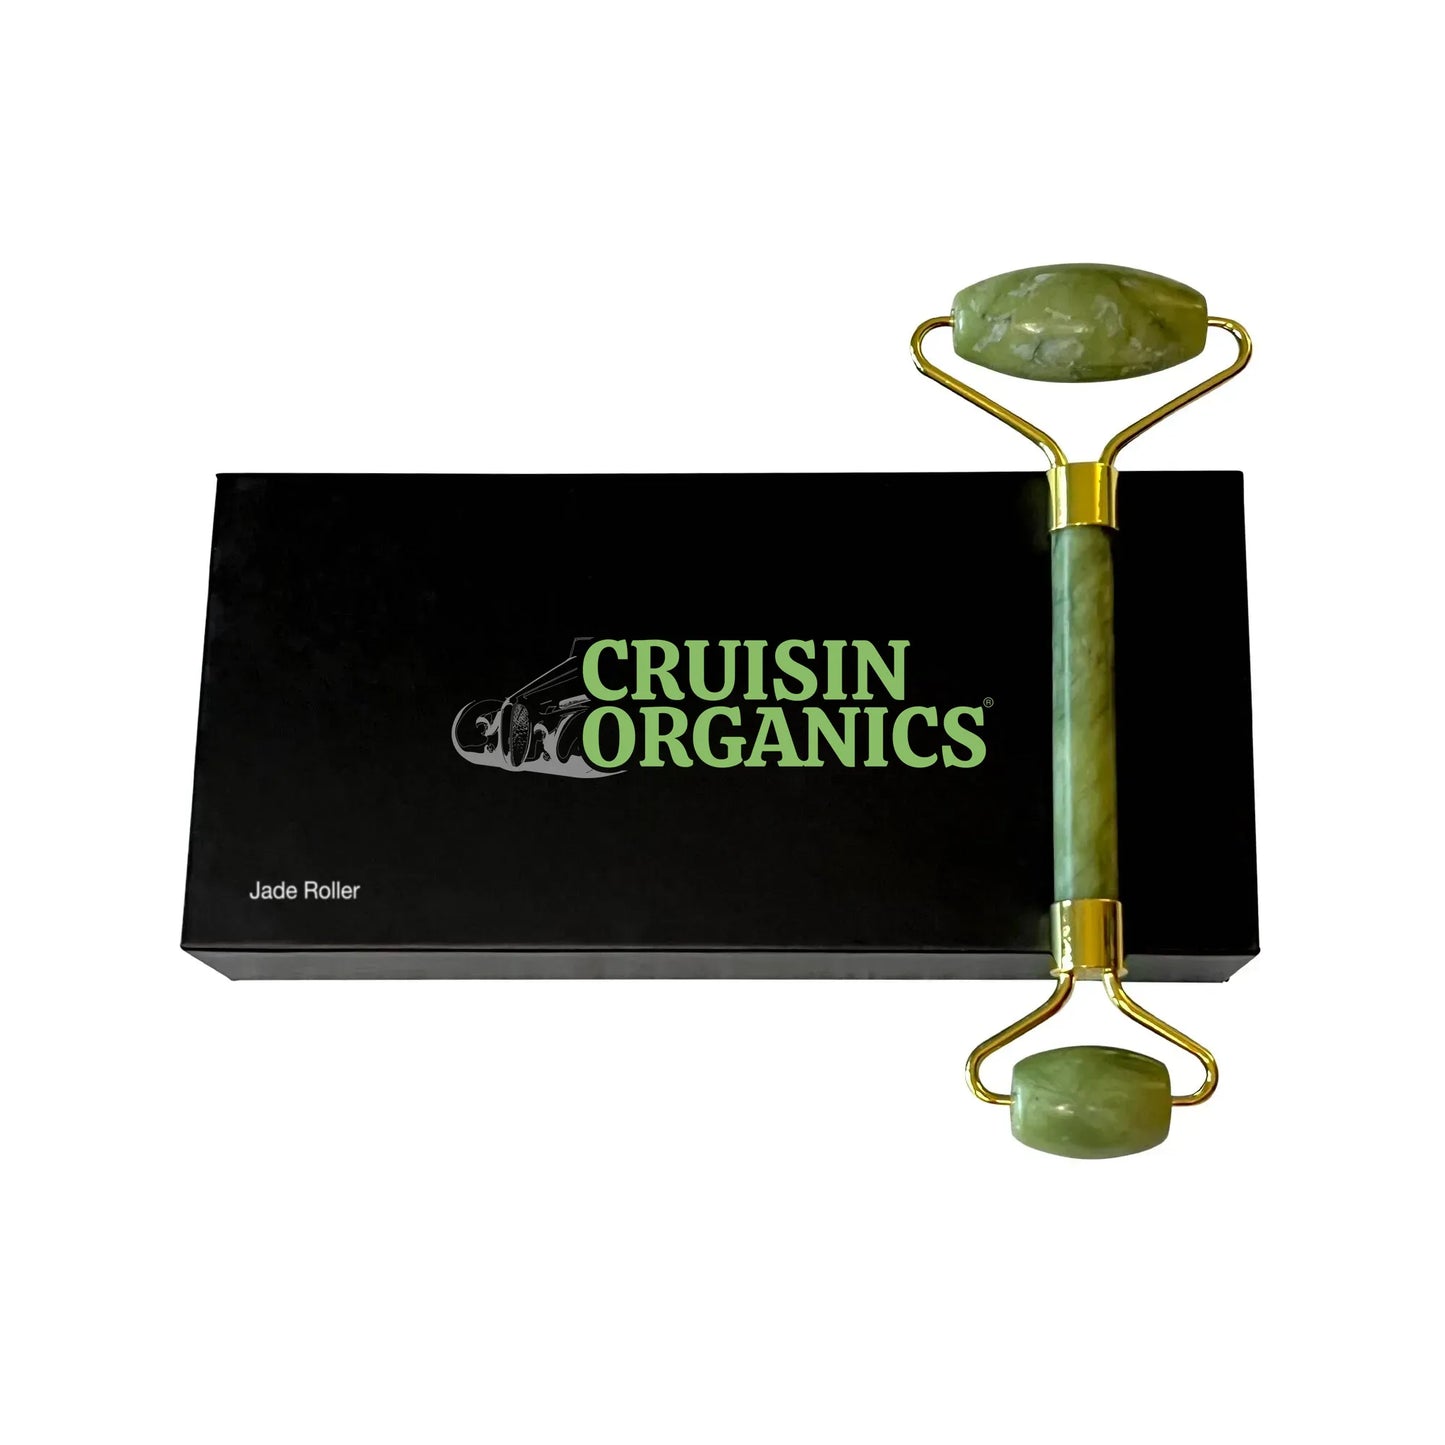 Enhance the appearance of your skin and decrease puffiness using Cruisin Organics' Jade Roller. This expertly designed tool promotes lymphatic drainage and blood circulation, leading to a reduction in the appearance of fine lines and wrinkles. Enhance the effectiveness of your skincare routine with this scientifically proven product.